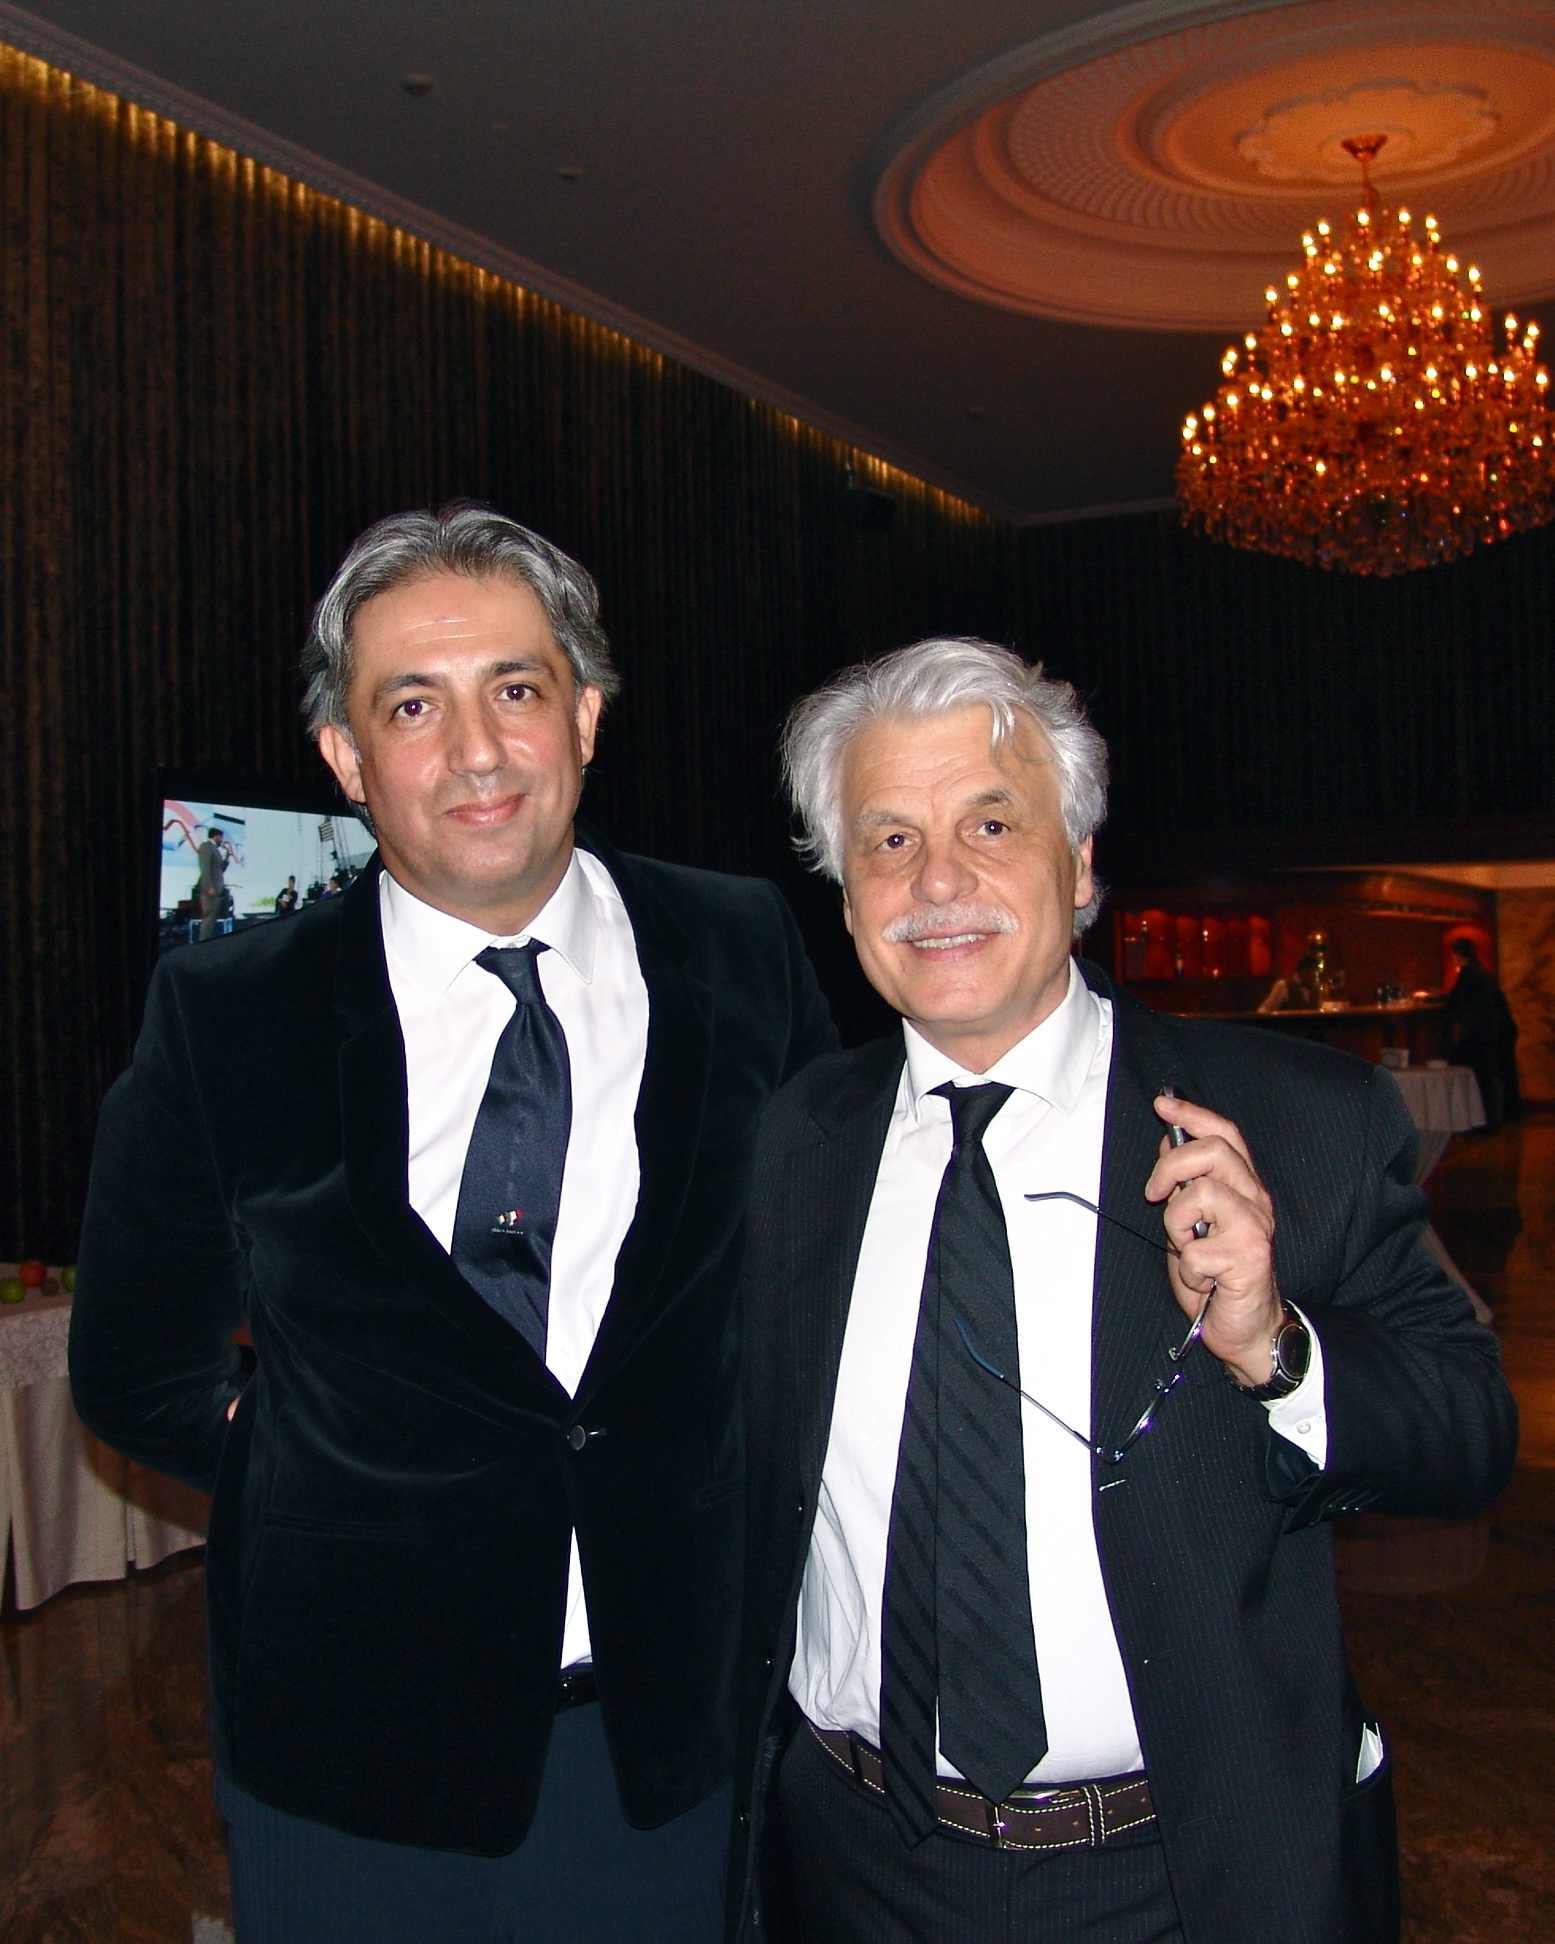 Krassimir Ivanoff and Michele Placido in Moscow